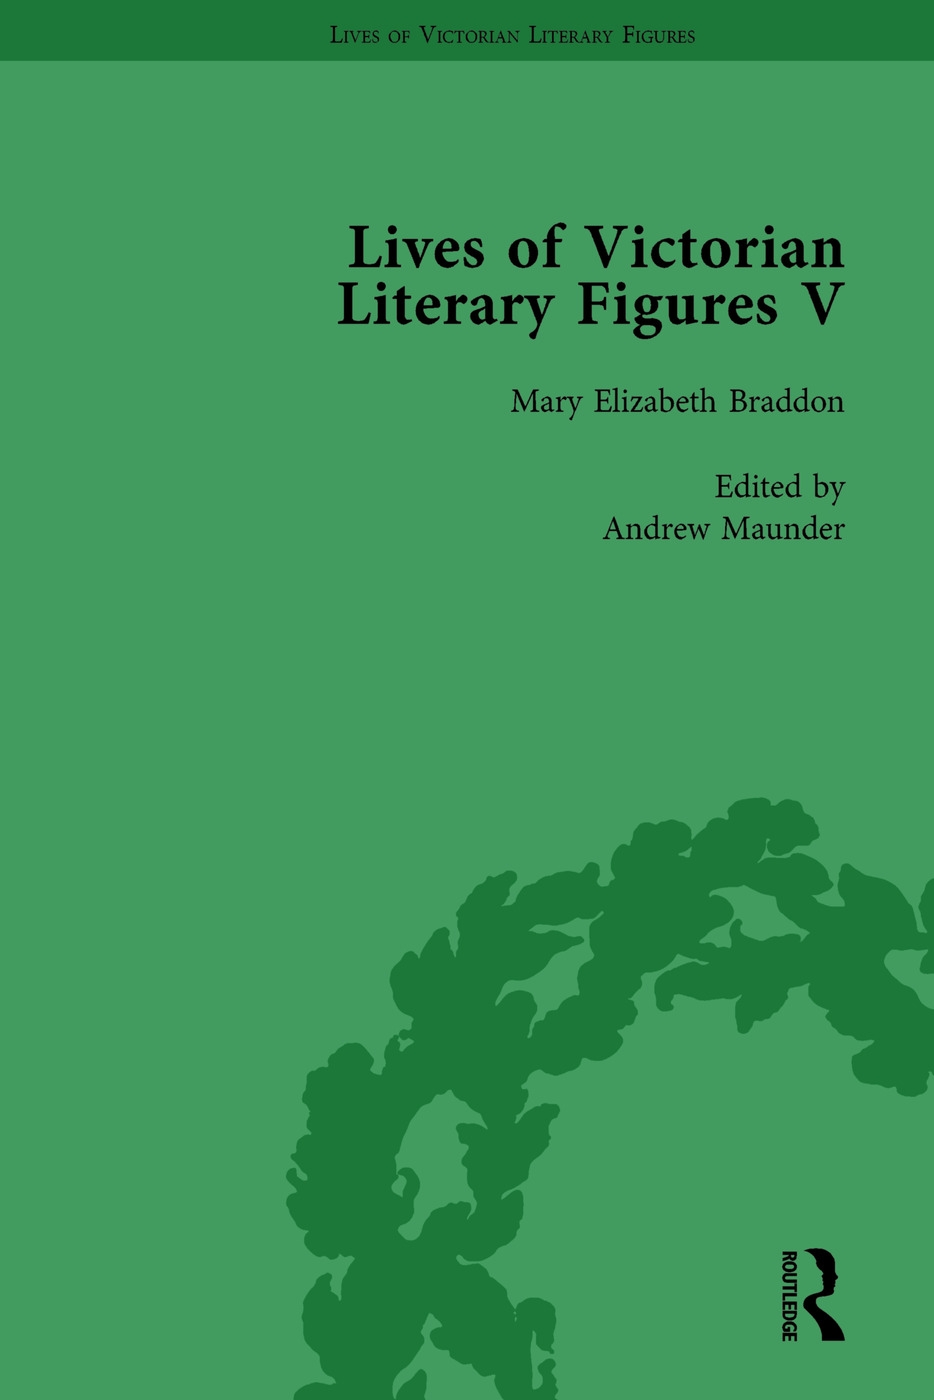 Lives of Victorian Literary Figures, Part V, Volume 1: Mary Elizabeth Braddon, Wilkie Collins and William Thackeray by Their Contemporaries